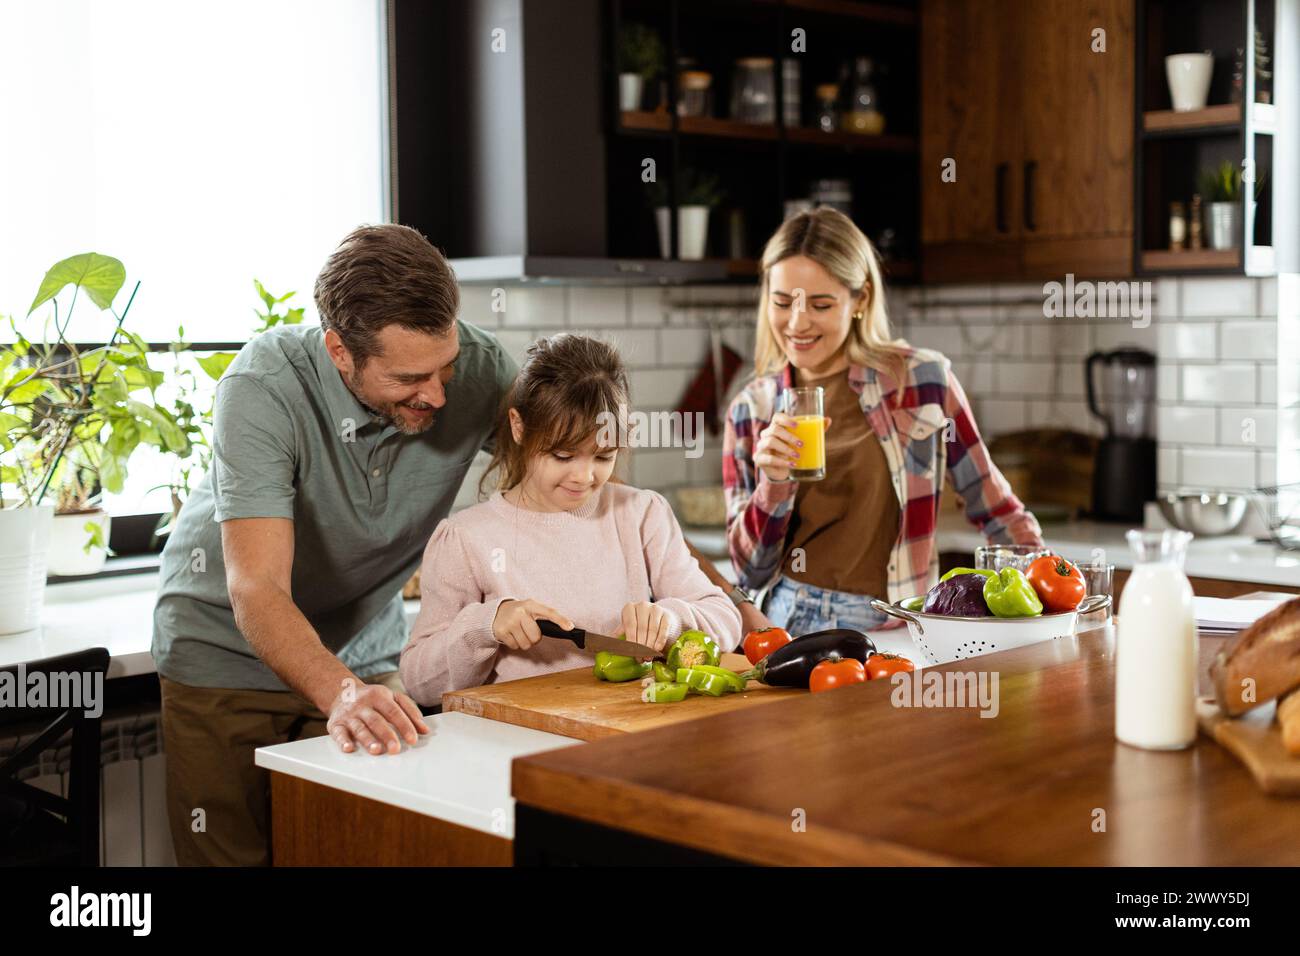 A family prepares a meal together, with dad helping daughter cut vegetables and mom enjoying a juice. Stock Photo